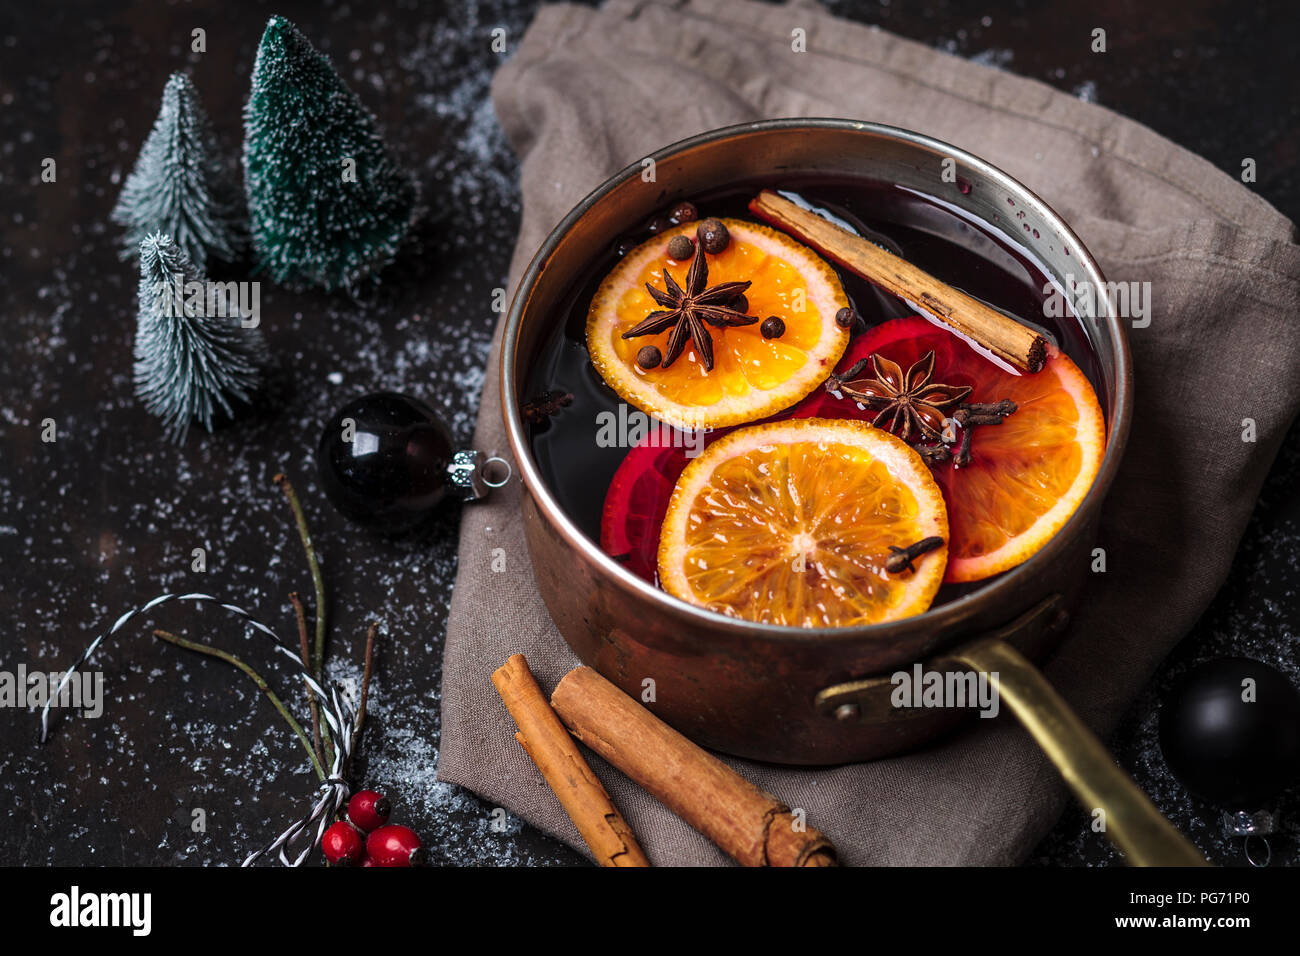 Pot of mulled wine Stock Photo